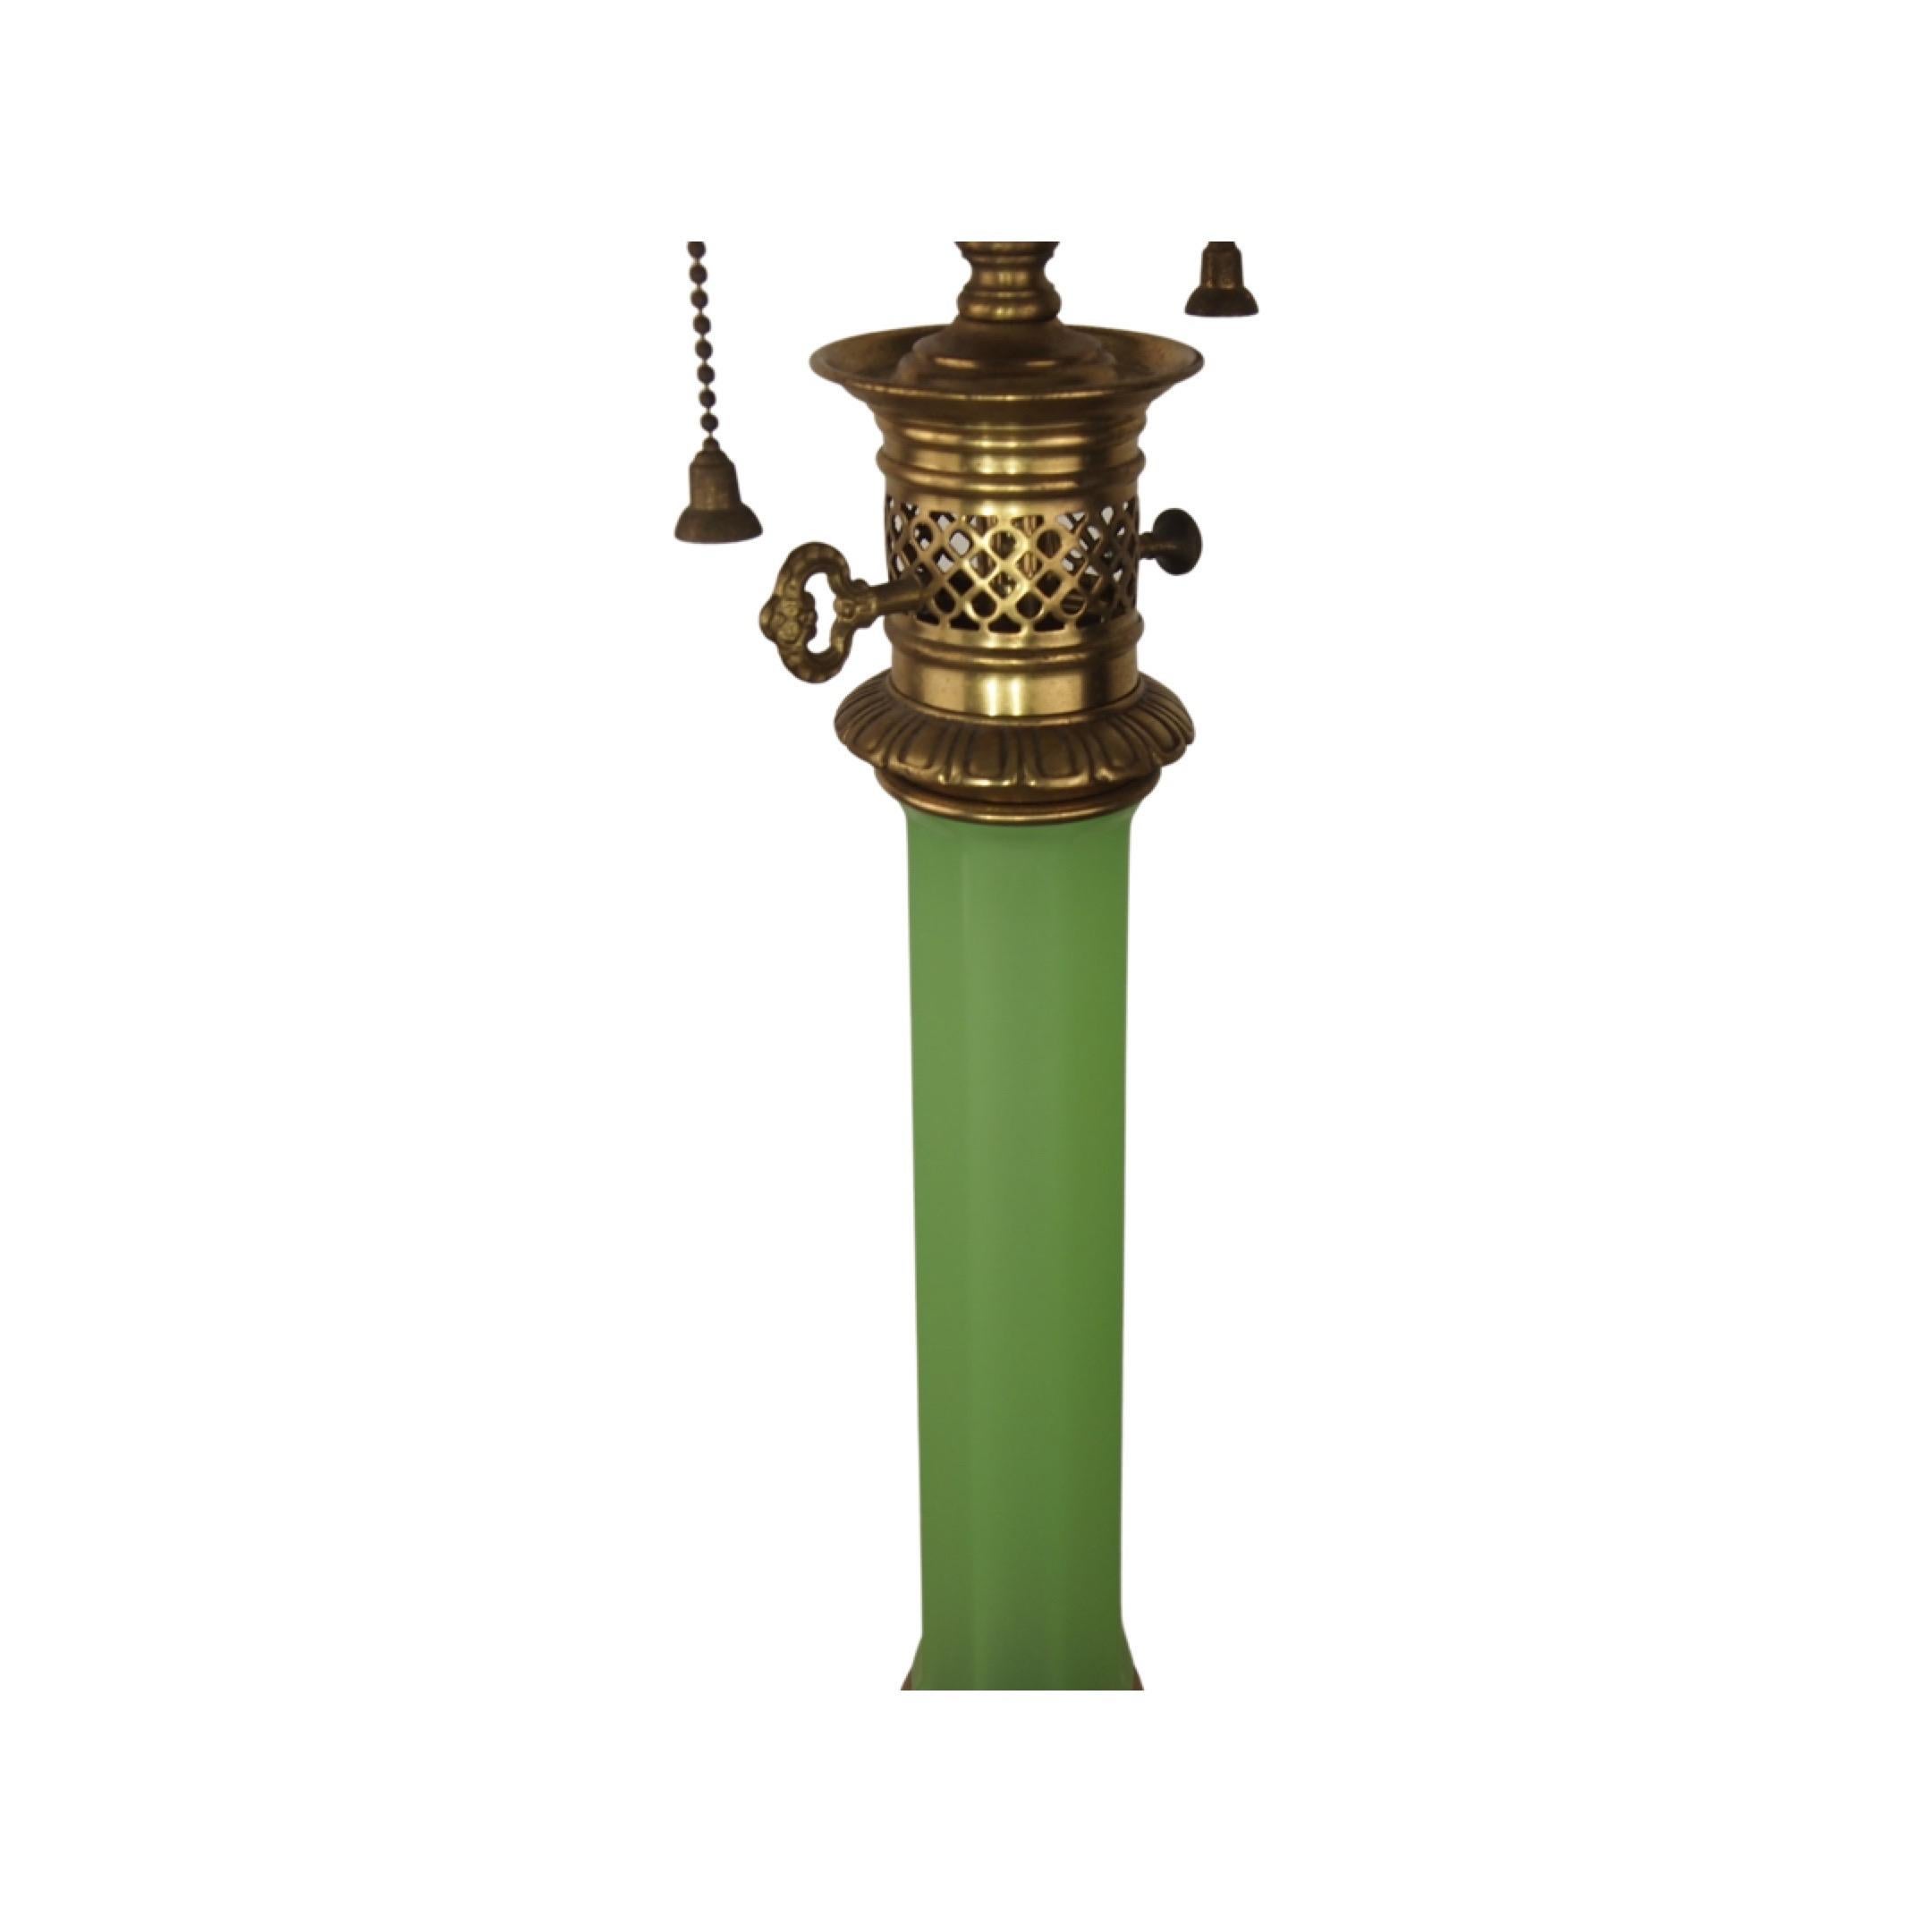 French Mid-Century Modern green opaline column with solid brass fittings sitting atop a round brass base. Retains original label of Warren Kessler, NY. Double bulb cluster with pull chain sockets. Shade height is adjustable. Wired and in good